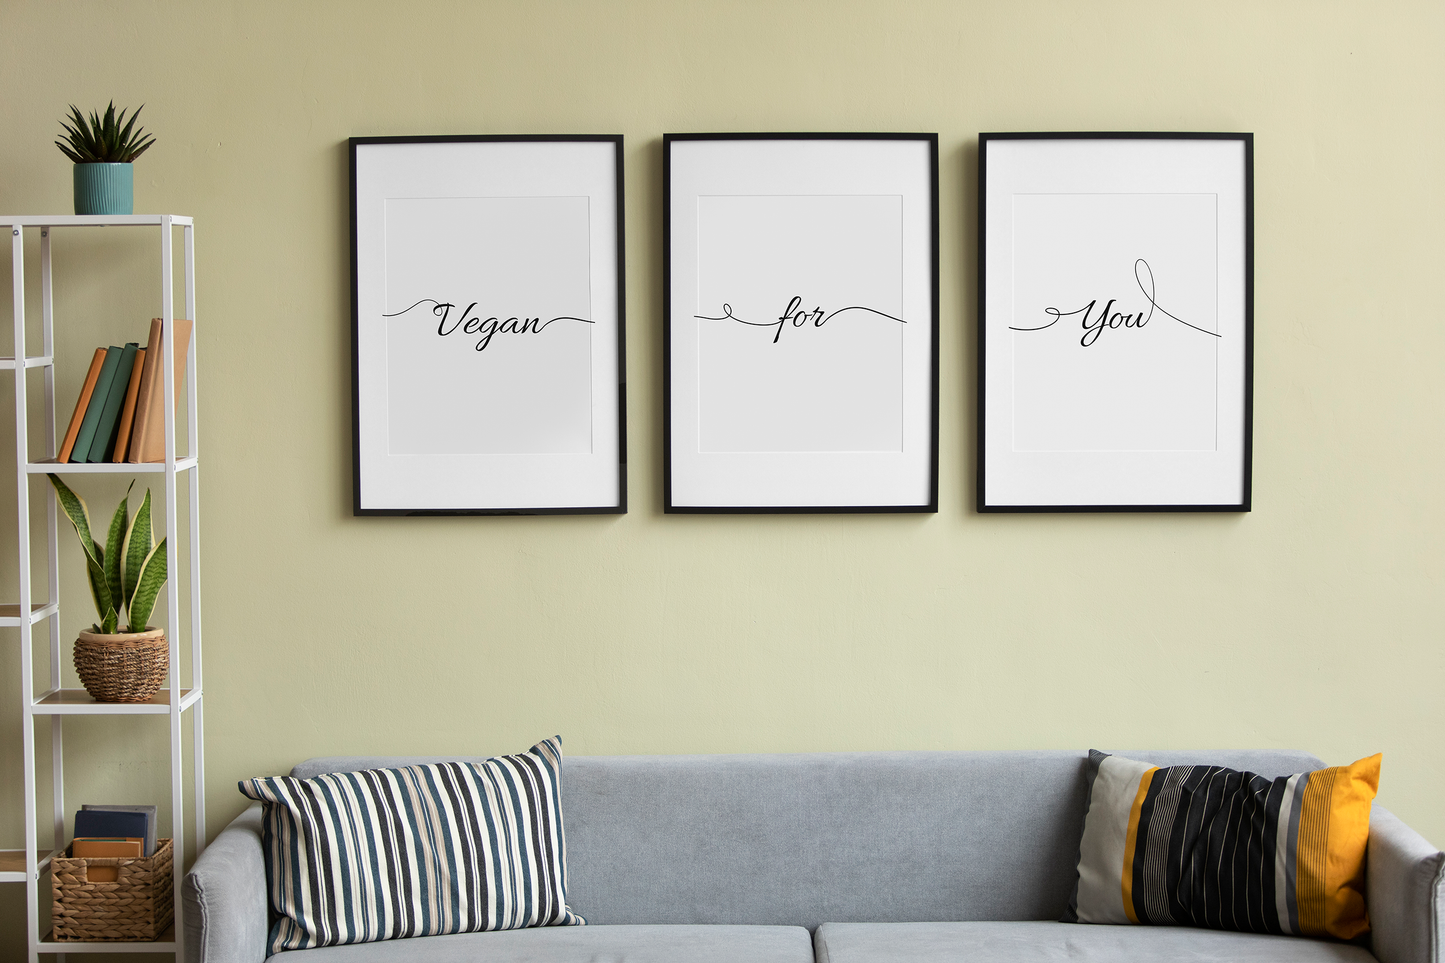 Modern home setup with a trio of printable digital paintings on the wall reading 'Vegan', 'for', 'You' above a comfortable sofa, blending art with home comfort.